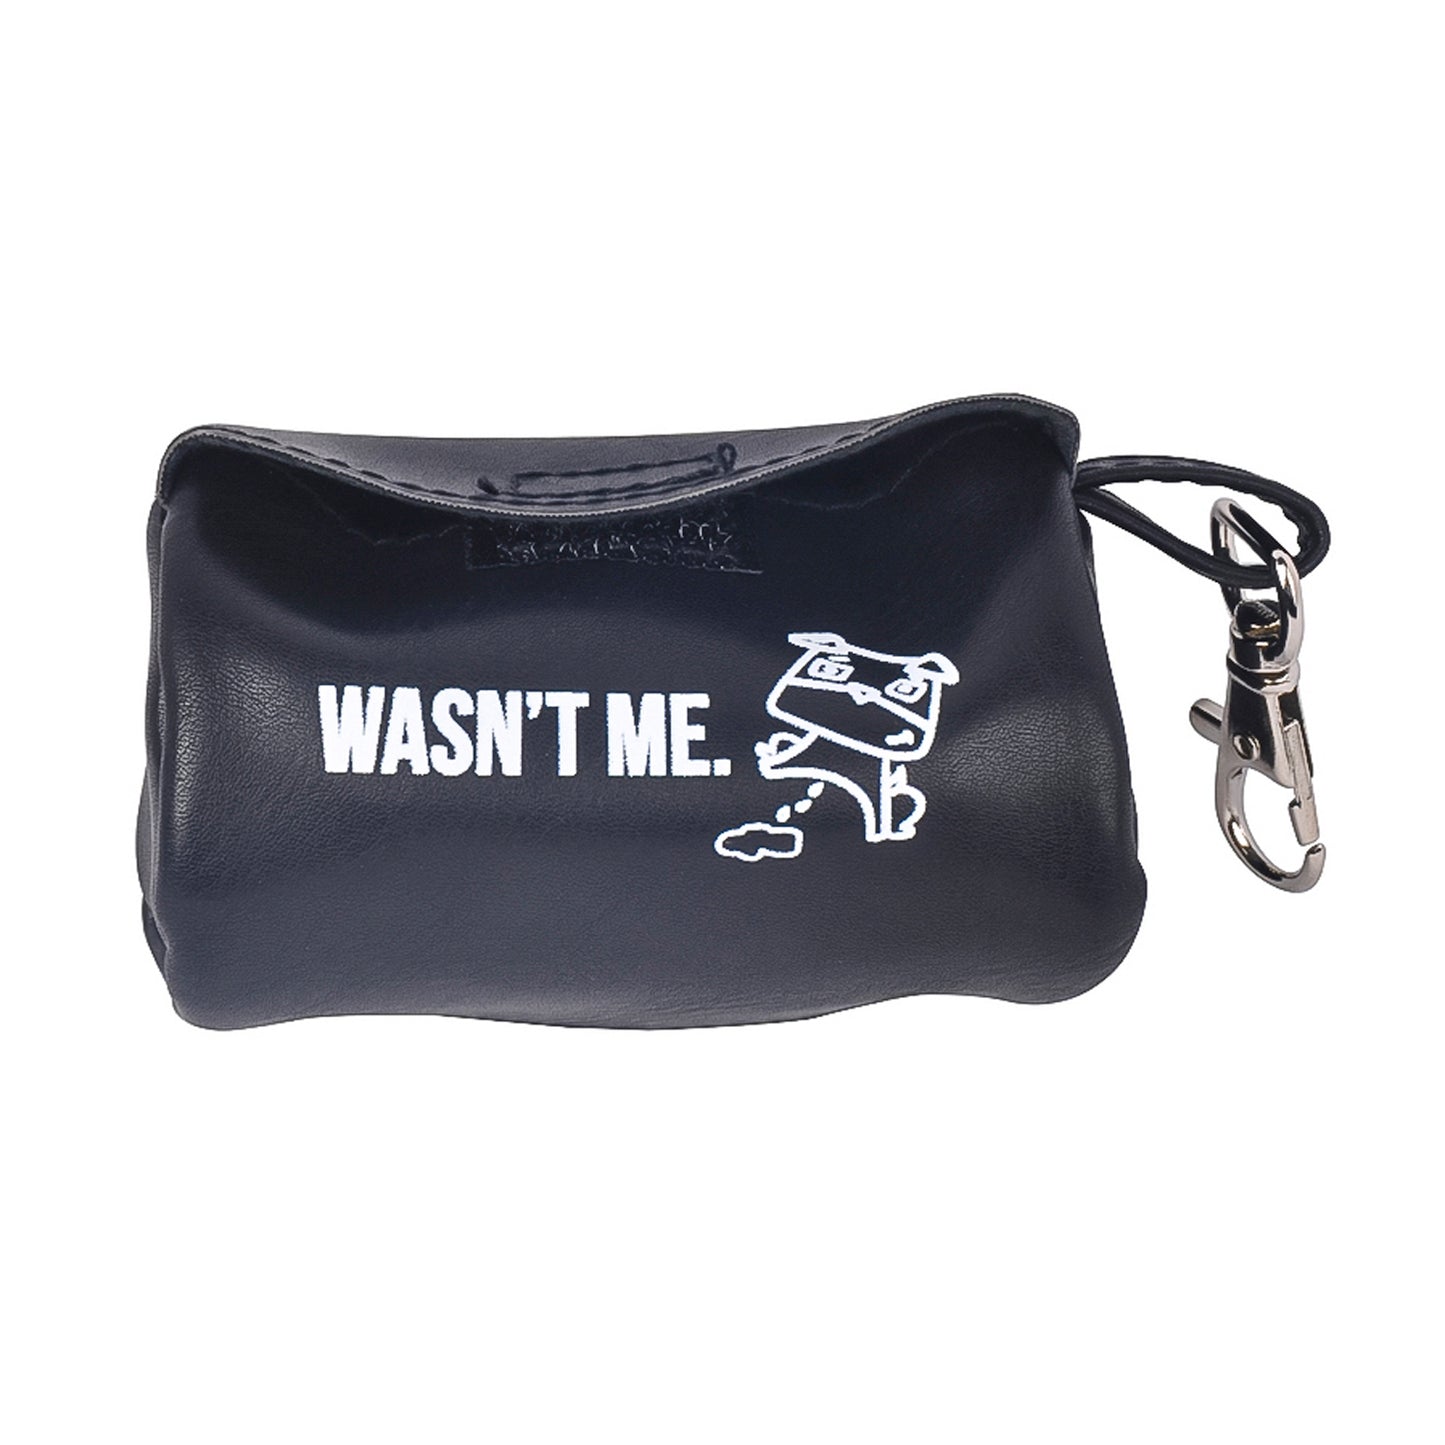 Pet Waste Pouch w/ Metal Clip & Two Rolls of Disposable Bags - Black